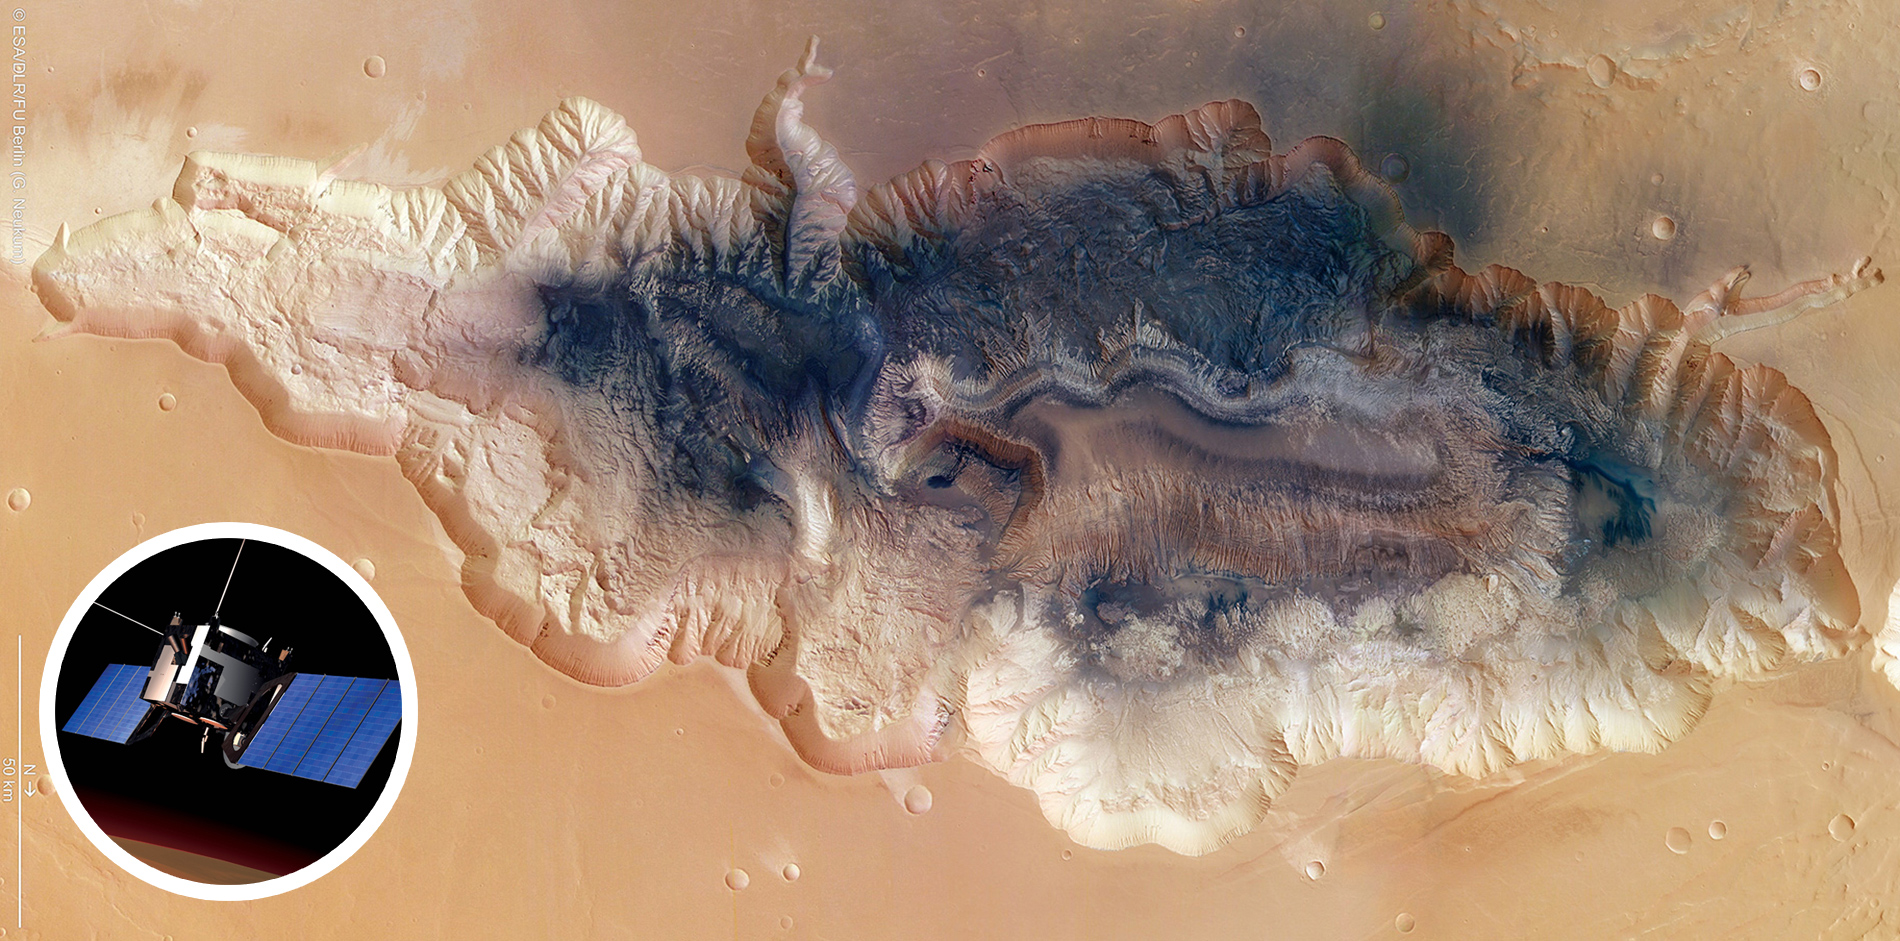 Hebes Chasma photographed by Mars Express (ESA/DLR/FU Berlin/G. Neukum), with inset rendering of Mars Express (ESA/Medialab)